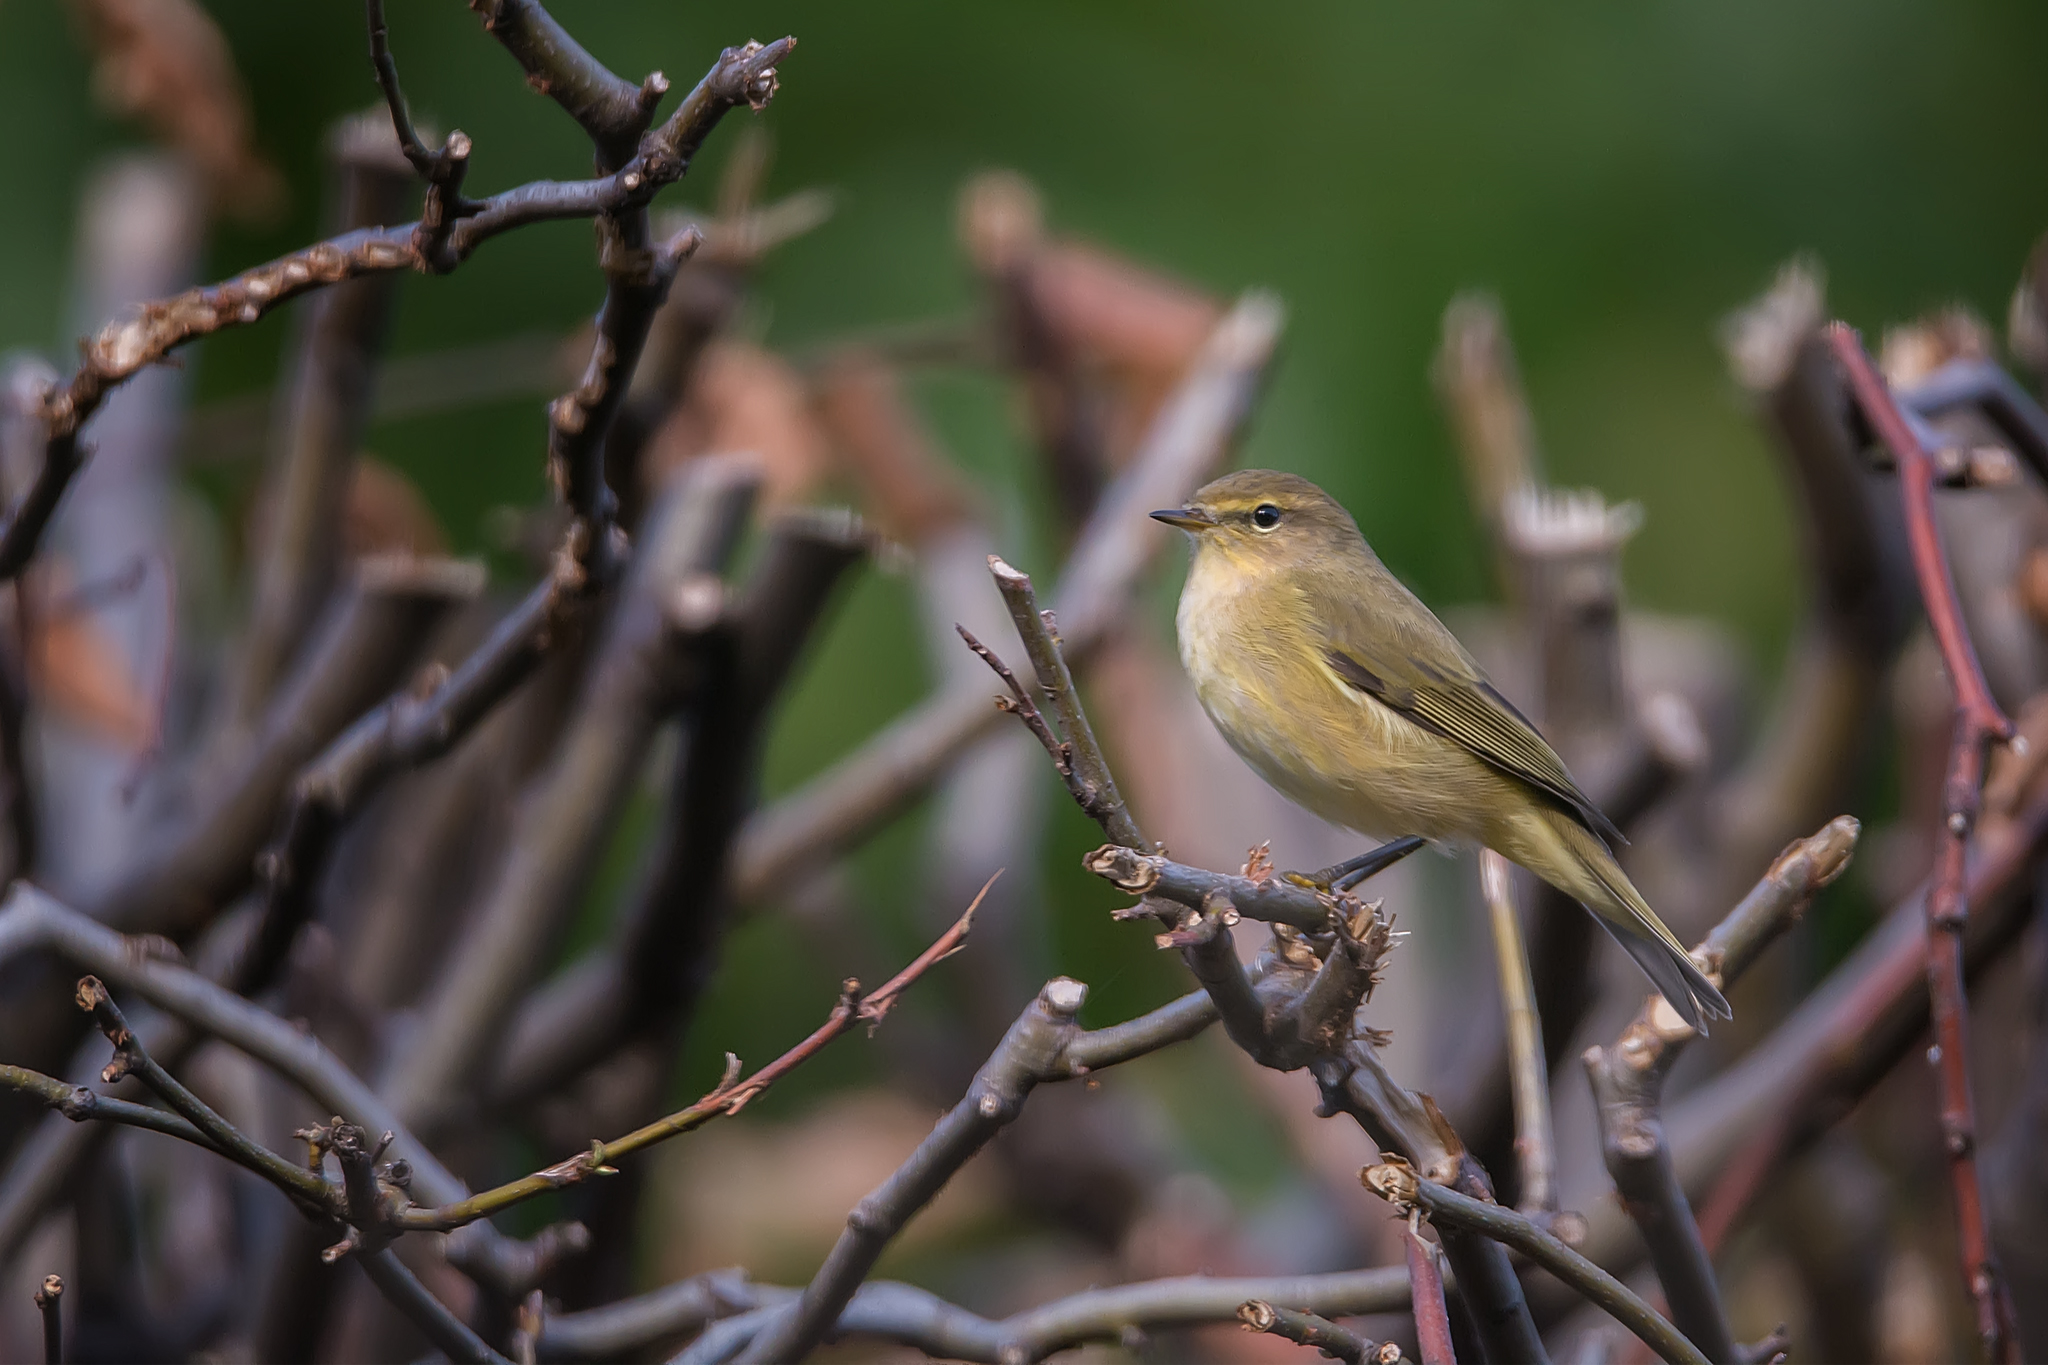 The common chiffchaff